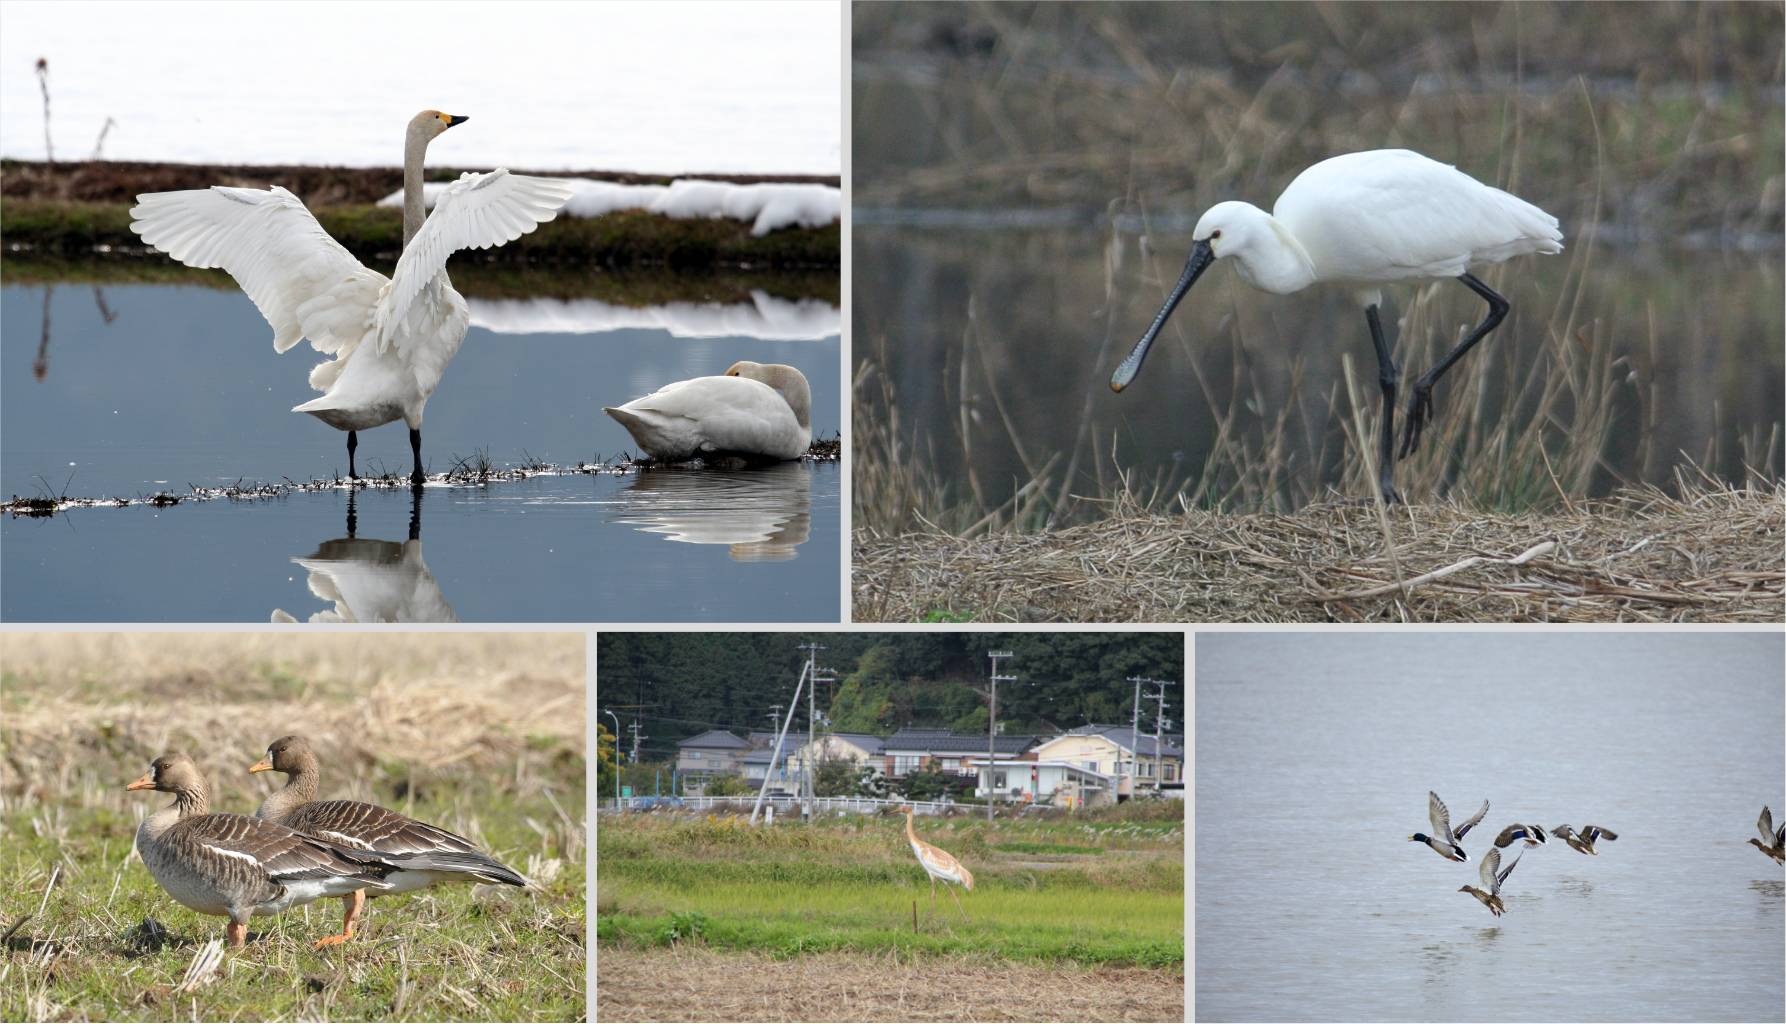 Wildlife found in the lower reaches of the Maruyama River